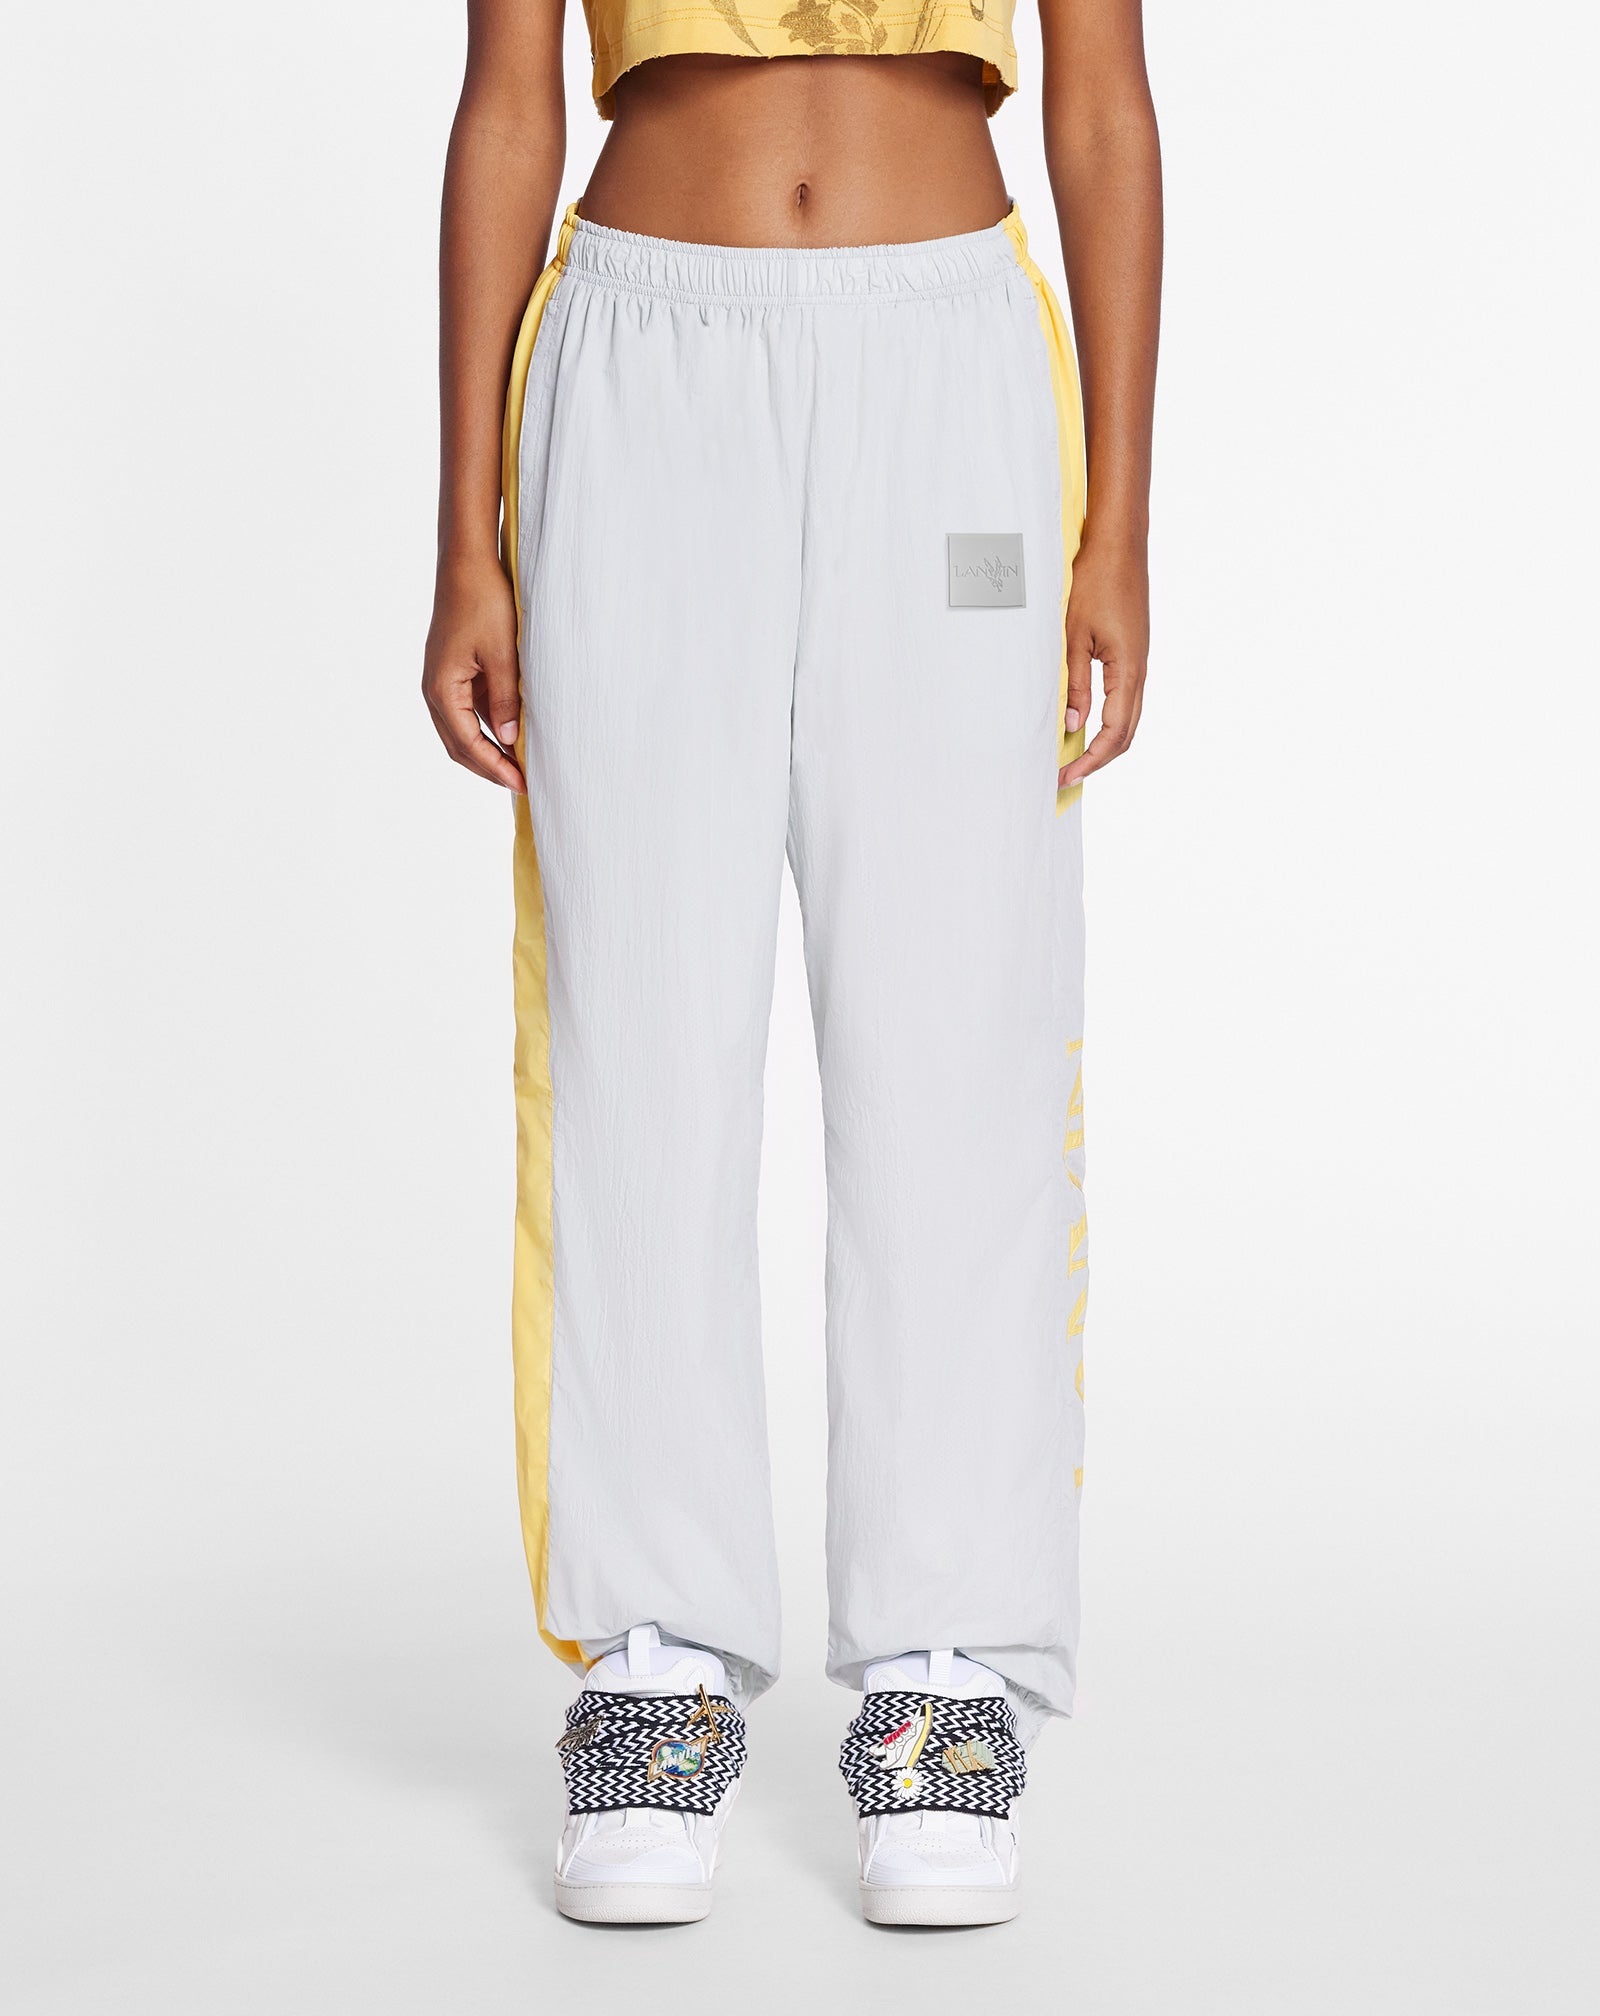 LANVIN X FUTURE JOGGING PANTS WITH CONTRASTING STRIPES - 4